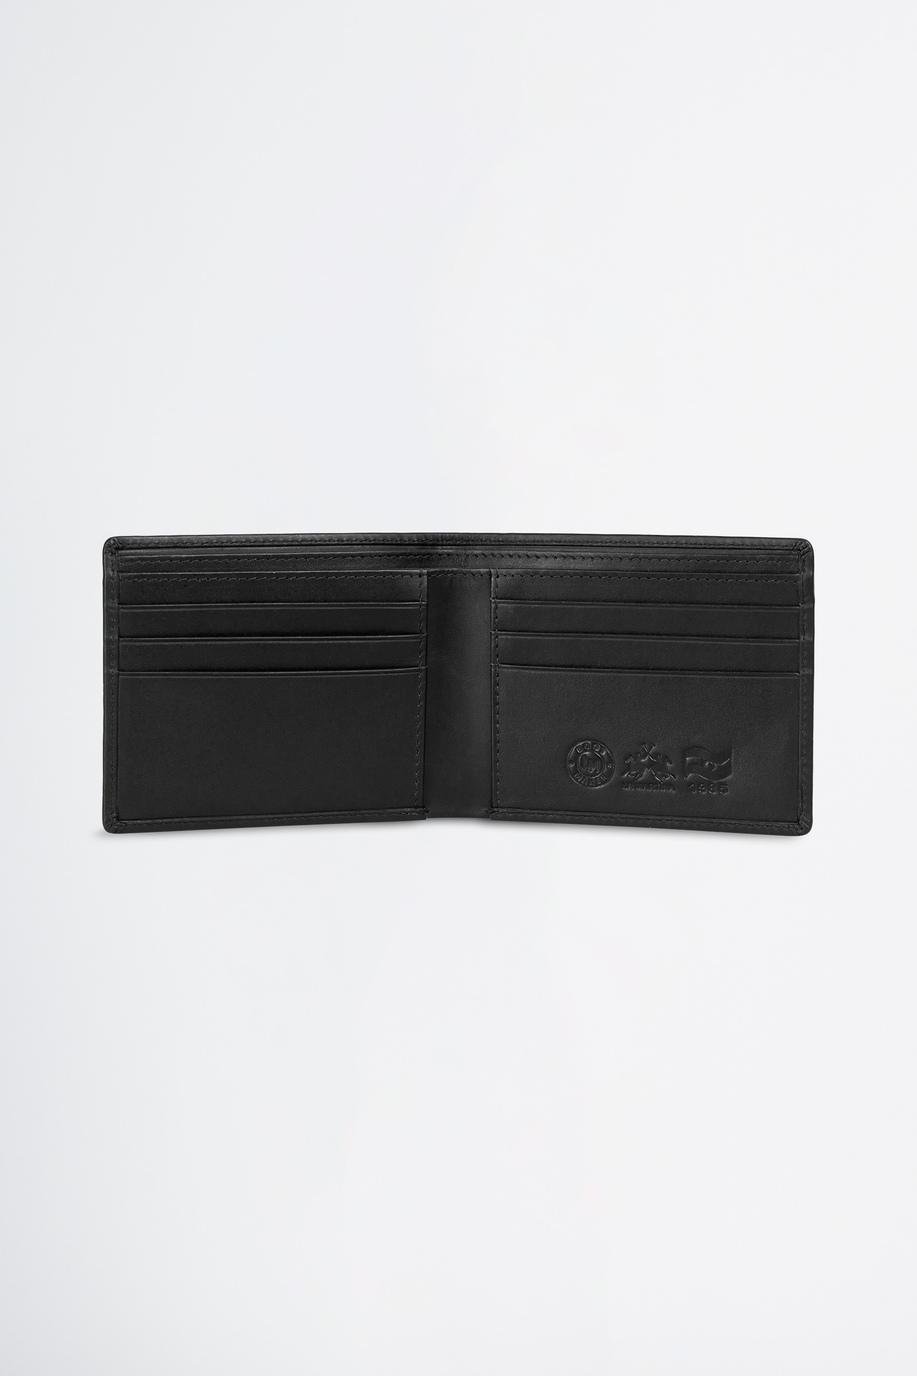 Leather wallet - Wallets and key chains | La Martina - Official Online Shop